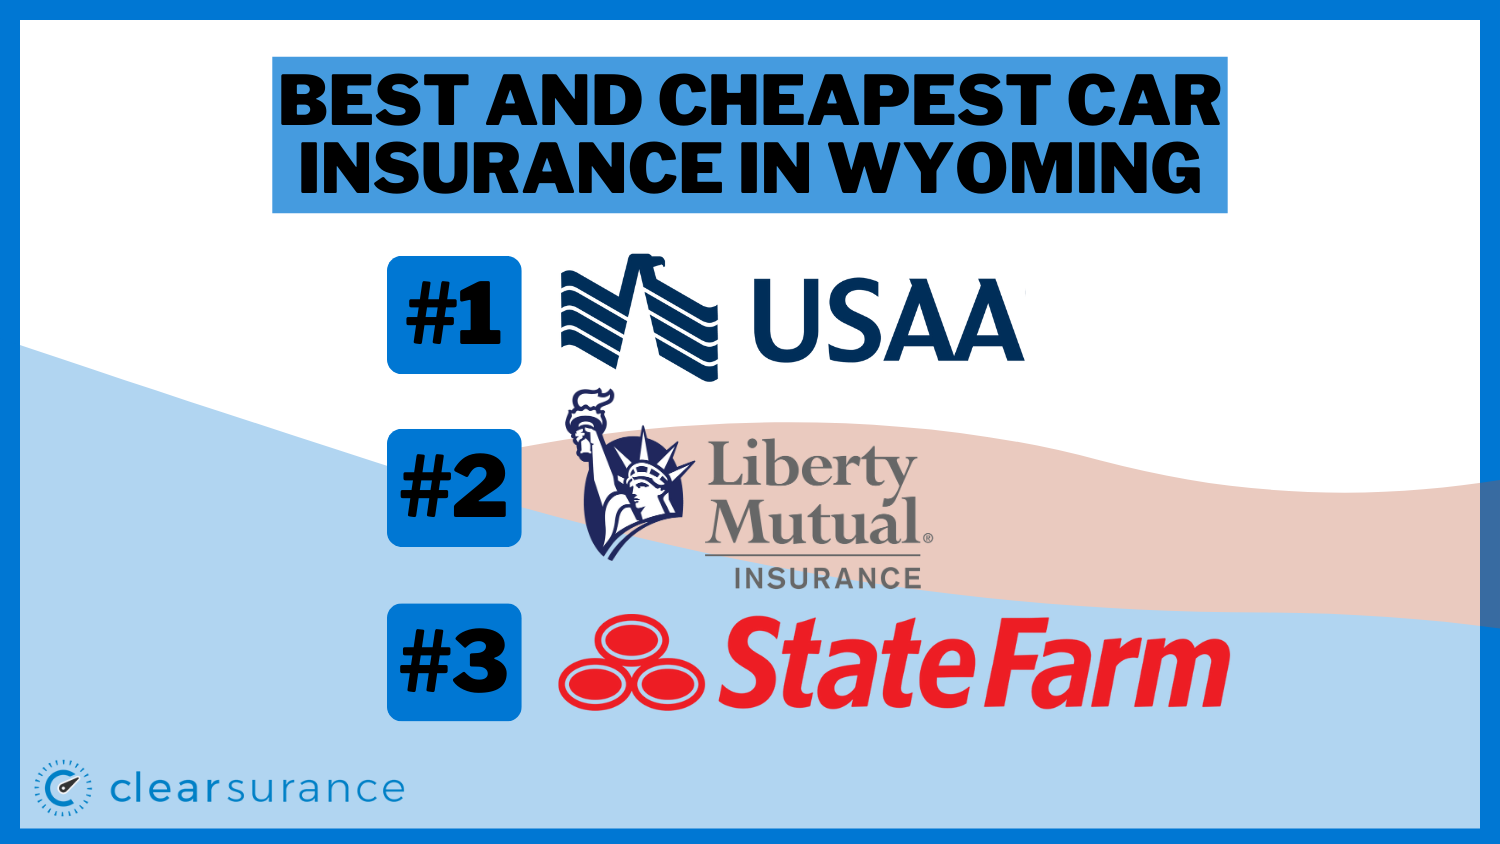 Best and Cheapest Car Insurance in Wyoming